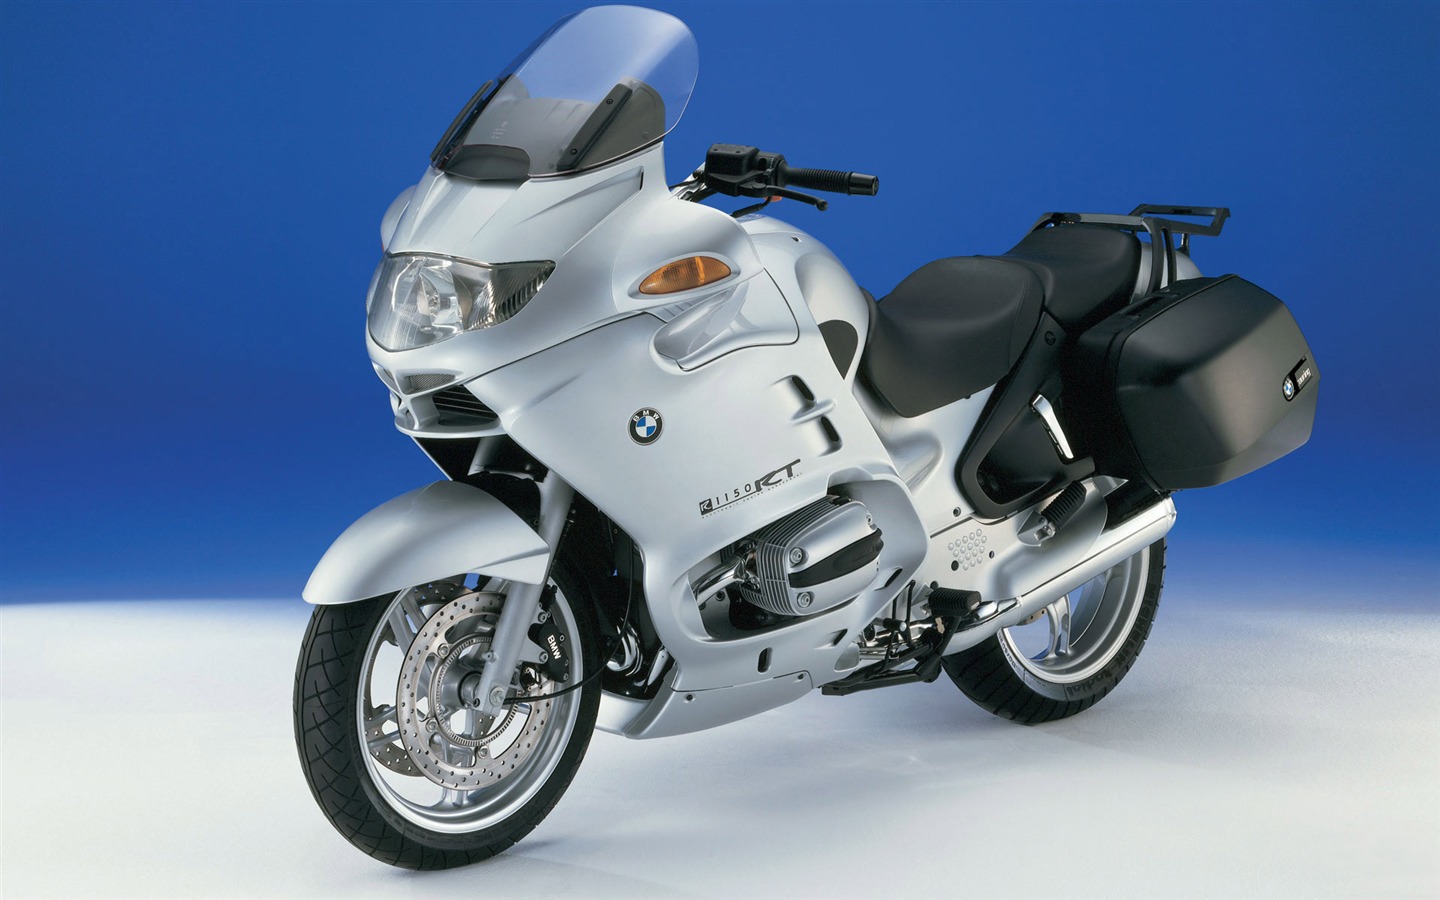 BMW motorcycle wallpapers (1) #12 - 1440x900